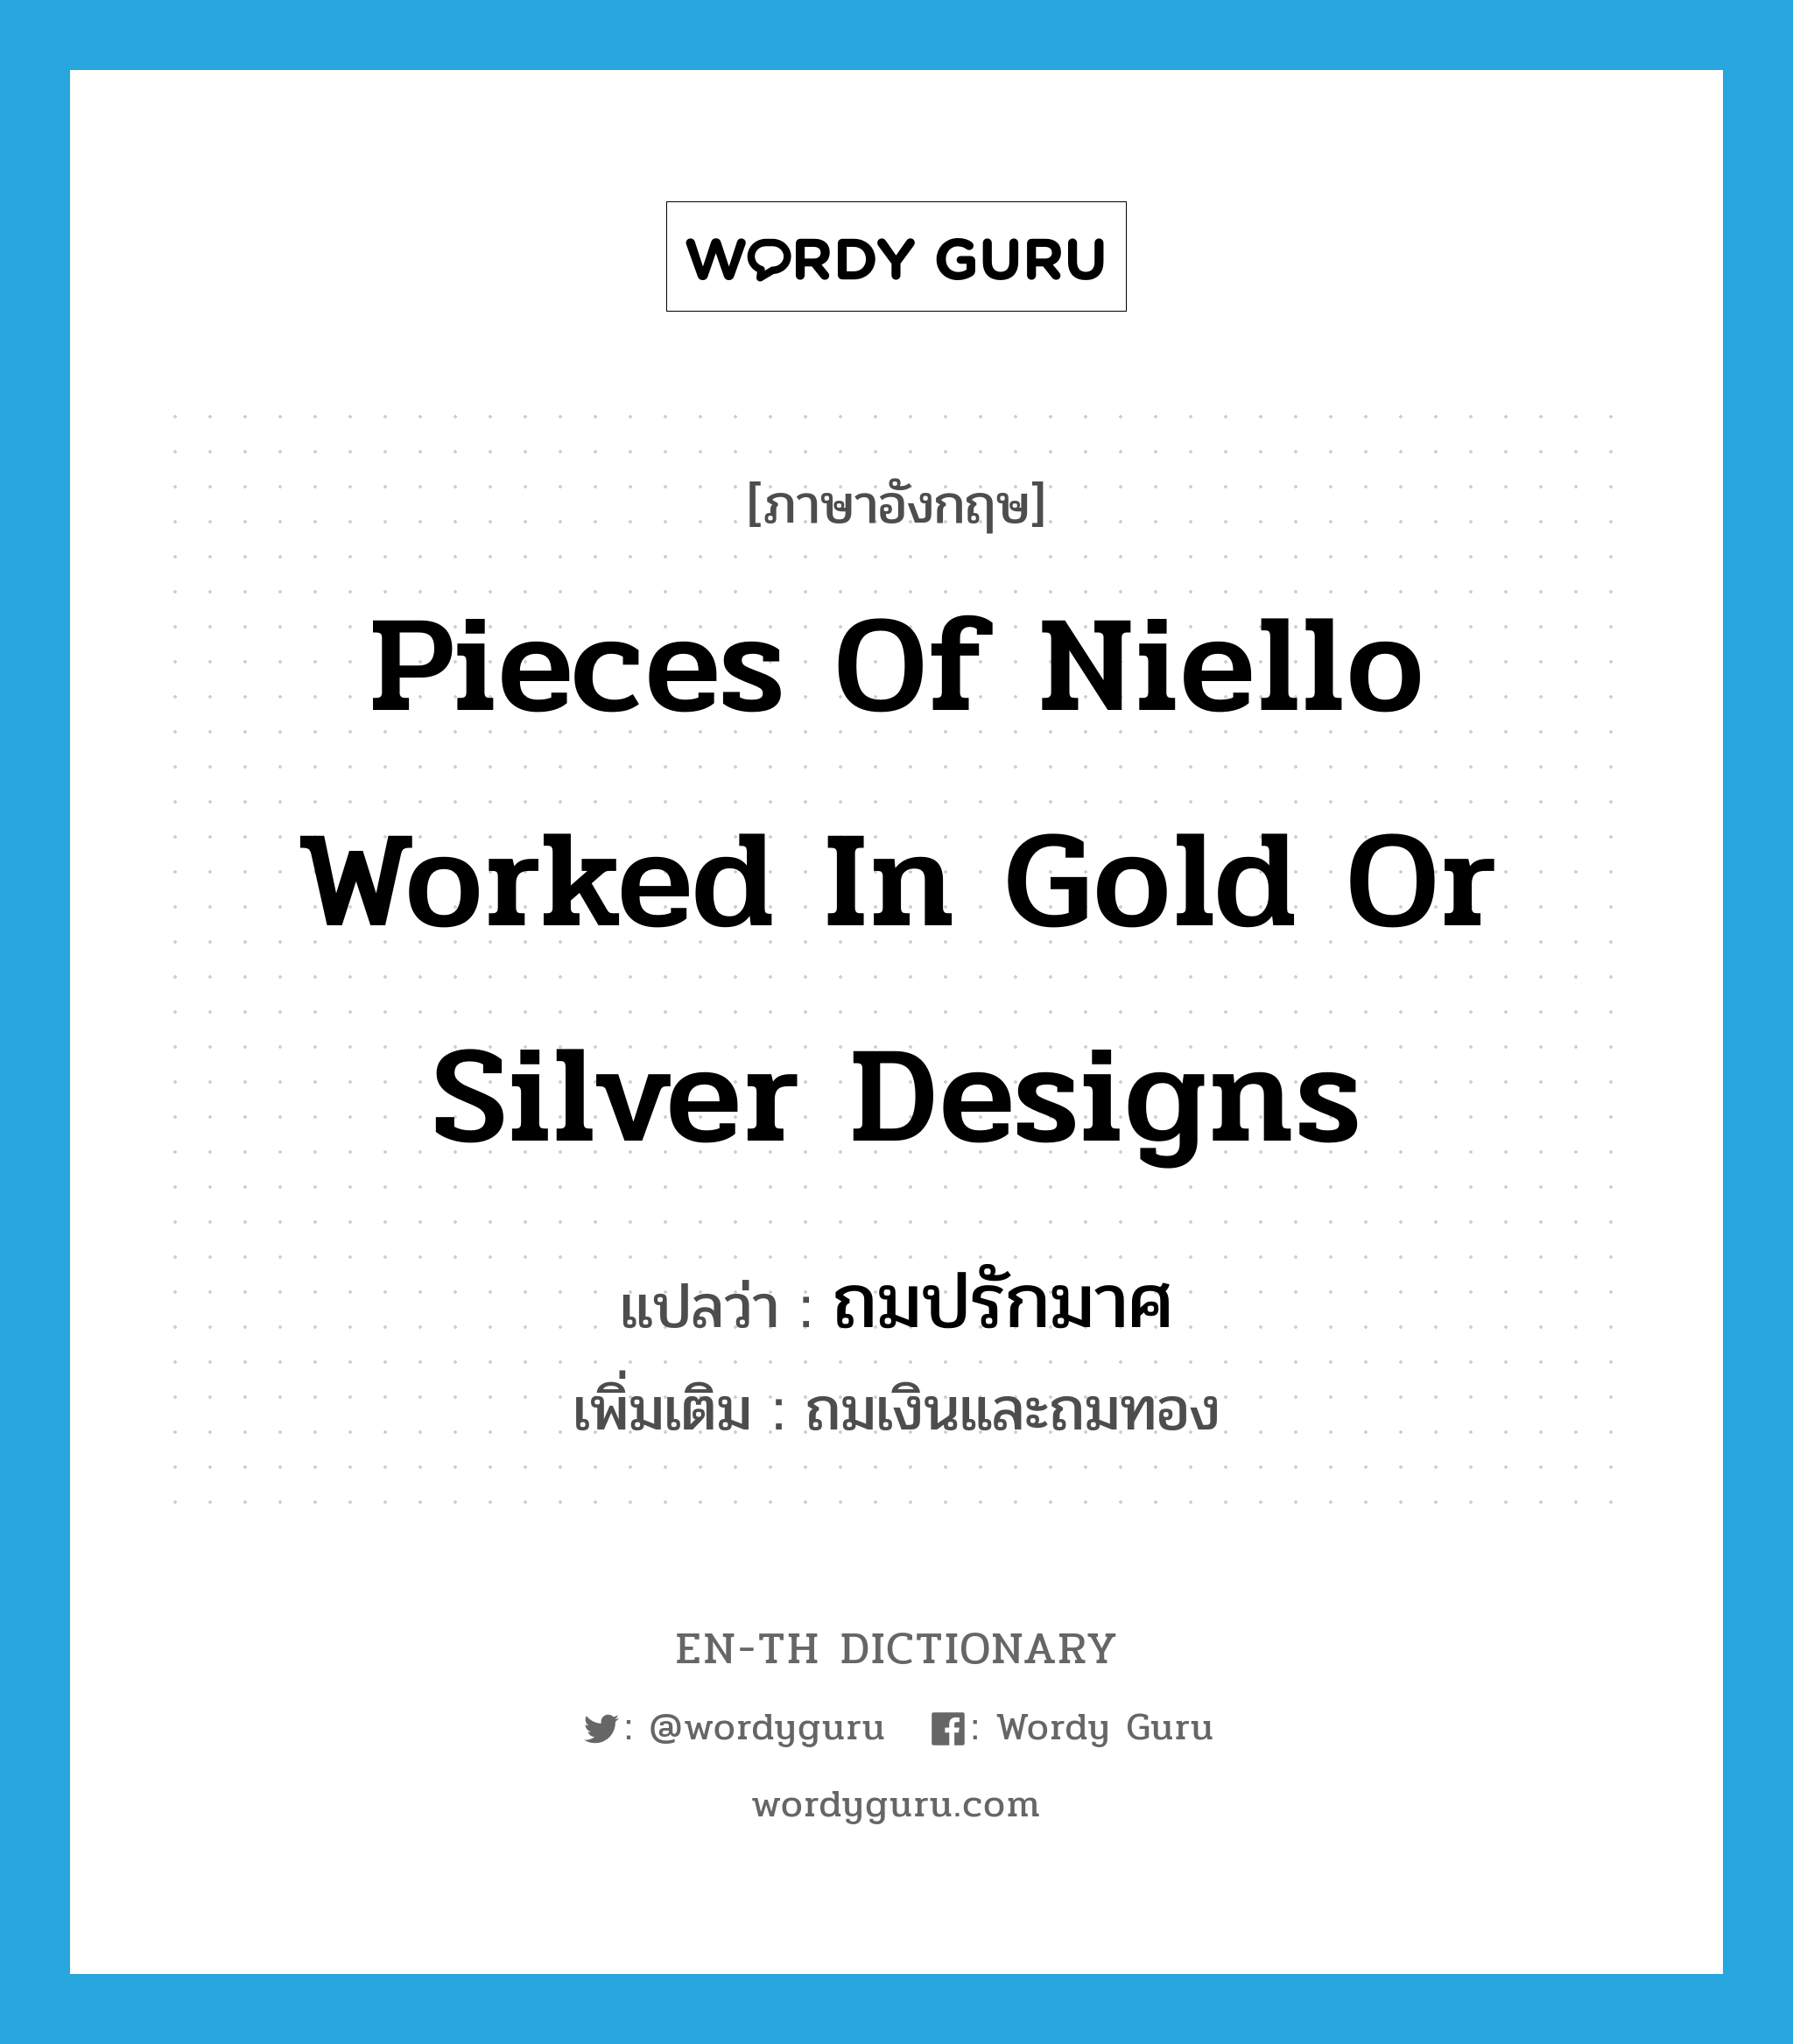 pieces of niello worked in gold or silver designs แปลว่า?, คำศัพท์ภาษาอังกฤษ pieces of niello worked in gold or silver designs แปลว่า ถมปรักมาศ ประเภท N เพิ่มเติม ถมเงินและถมทอง หมวด N